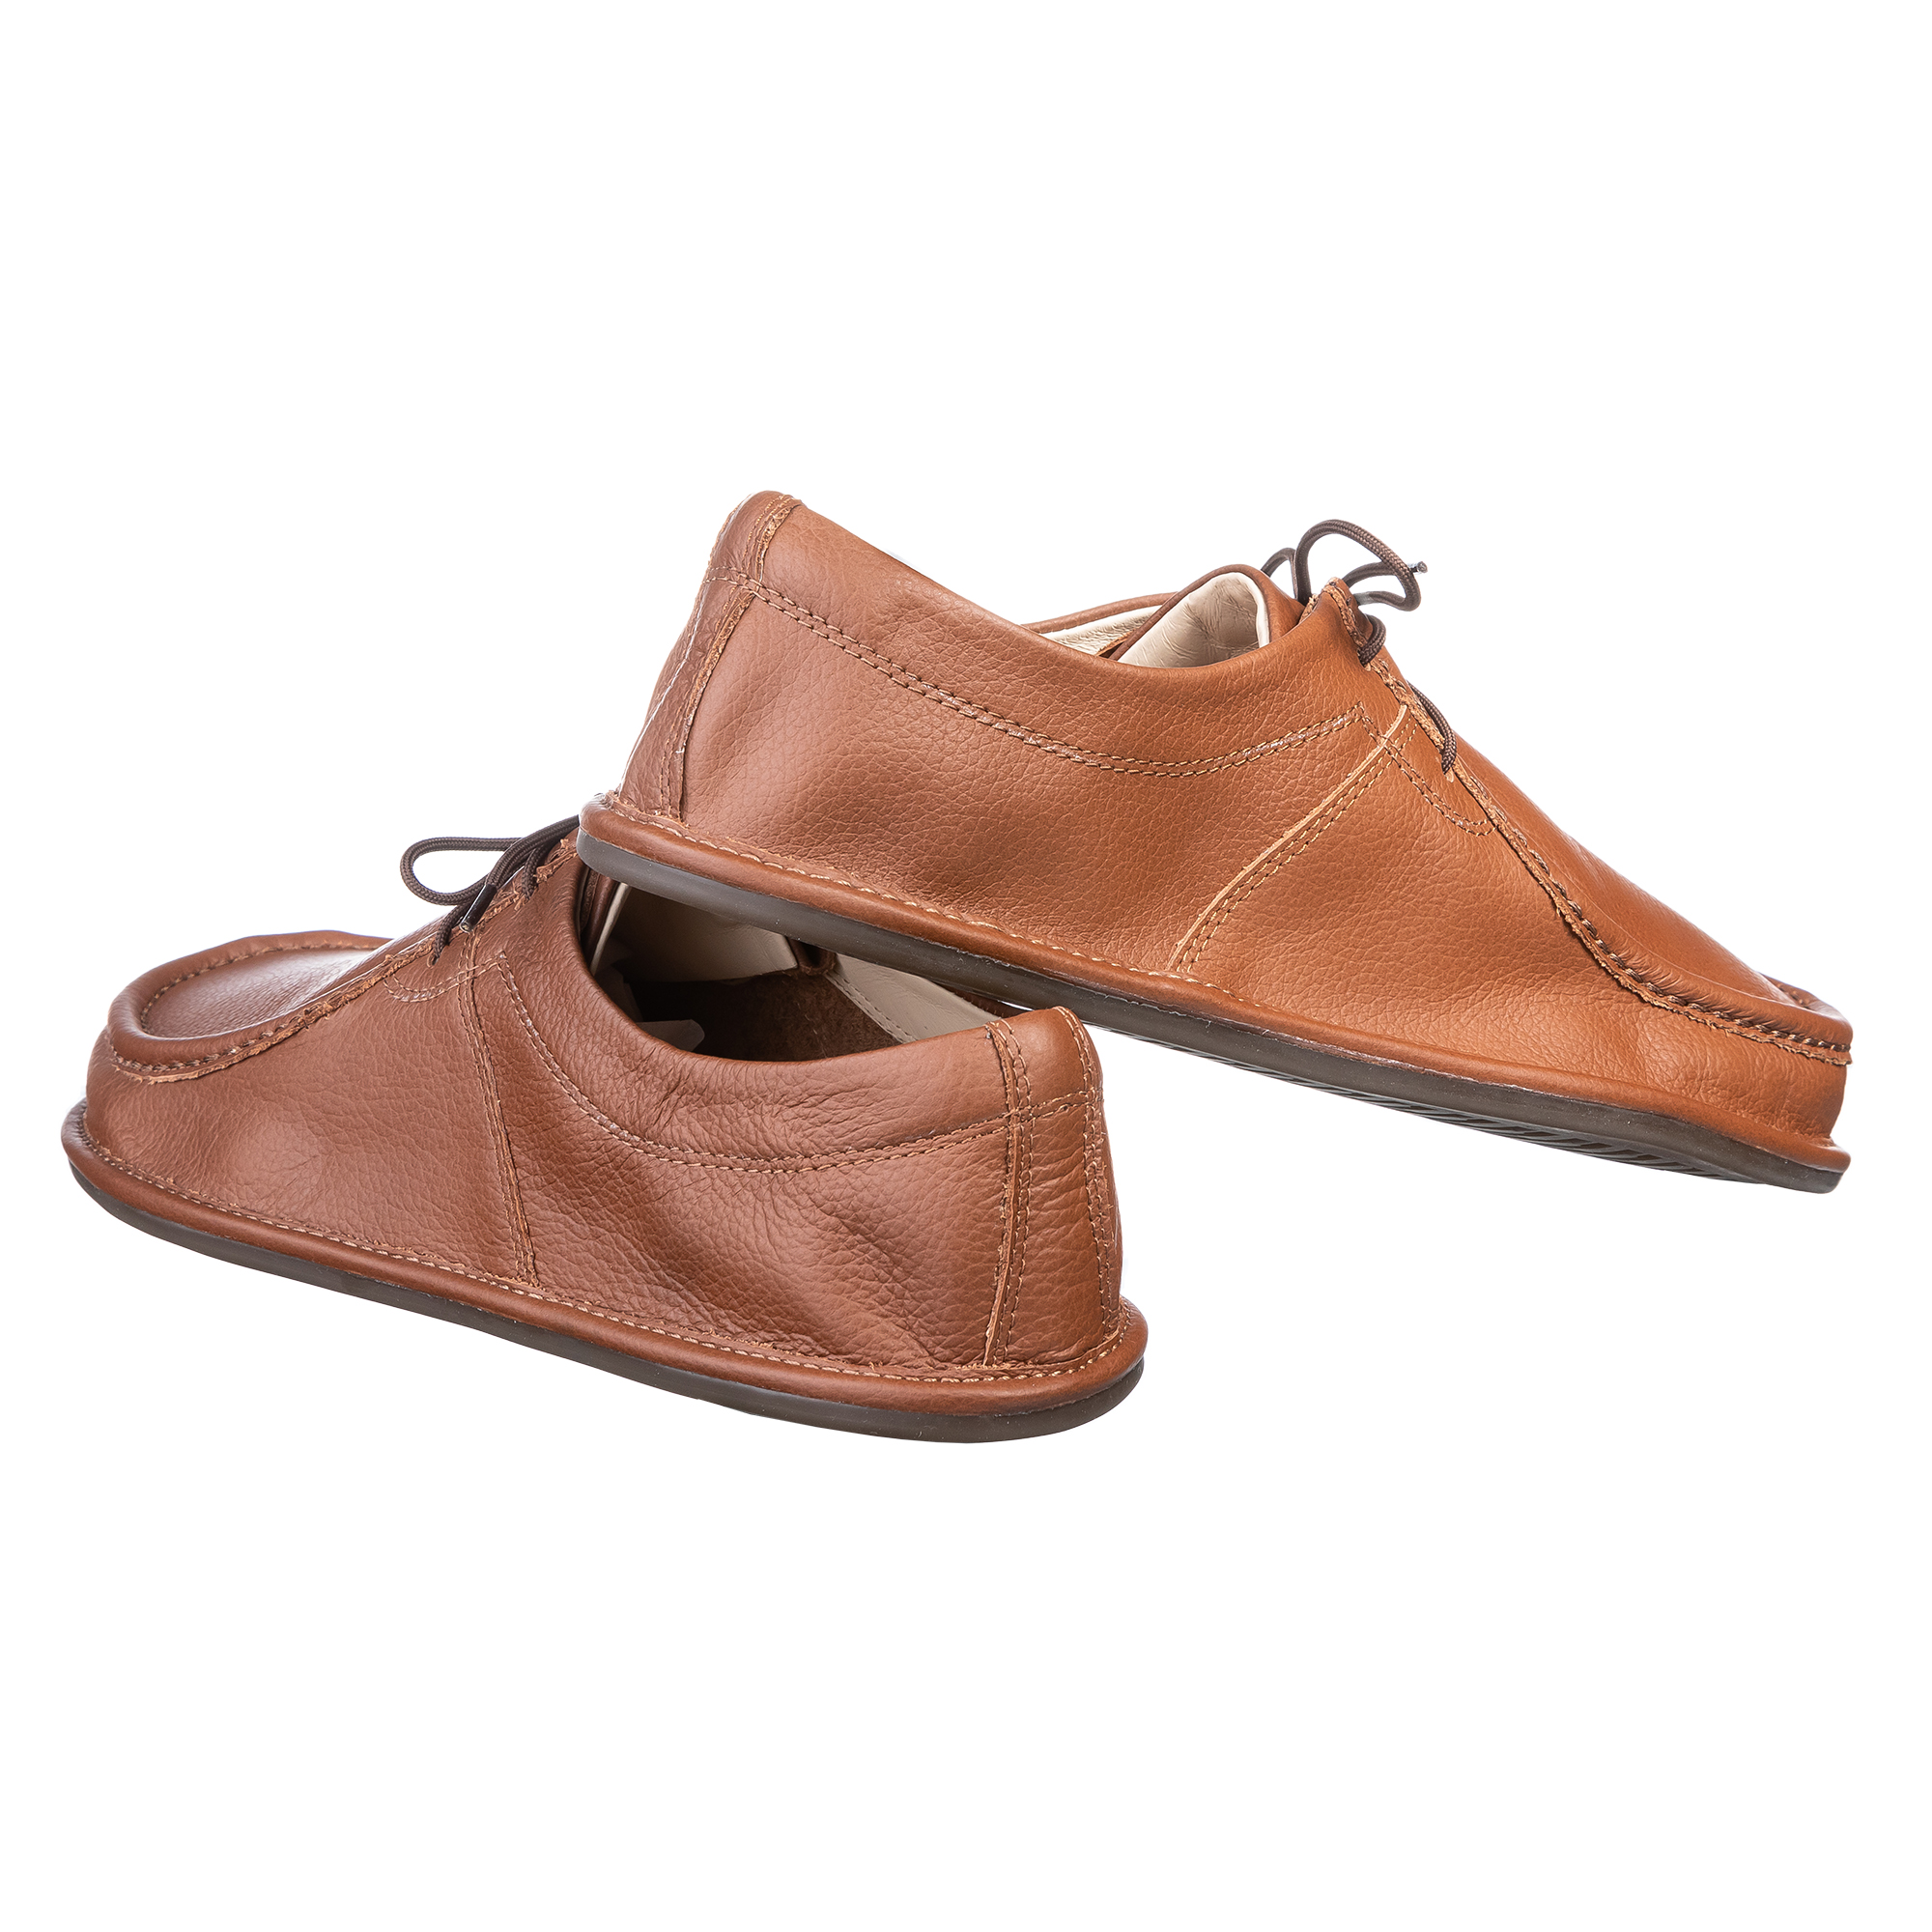 Casual barefoot shoes for men - Magical Shoes CAMERON